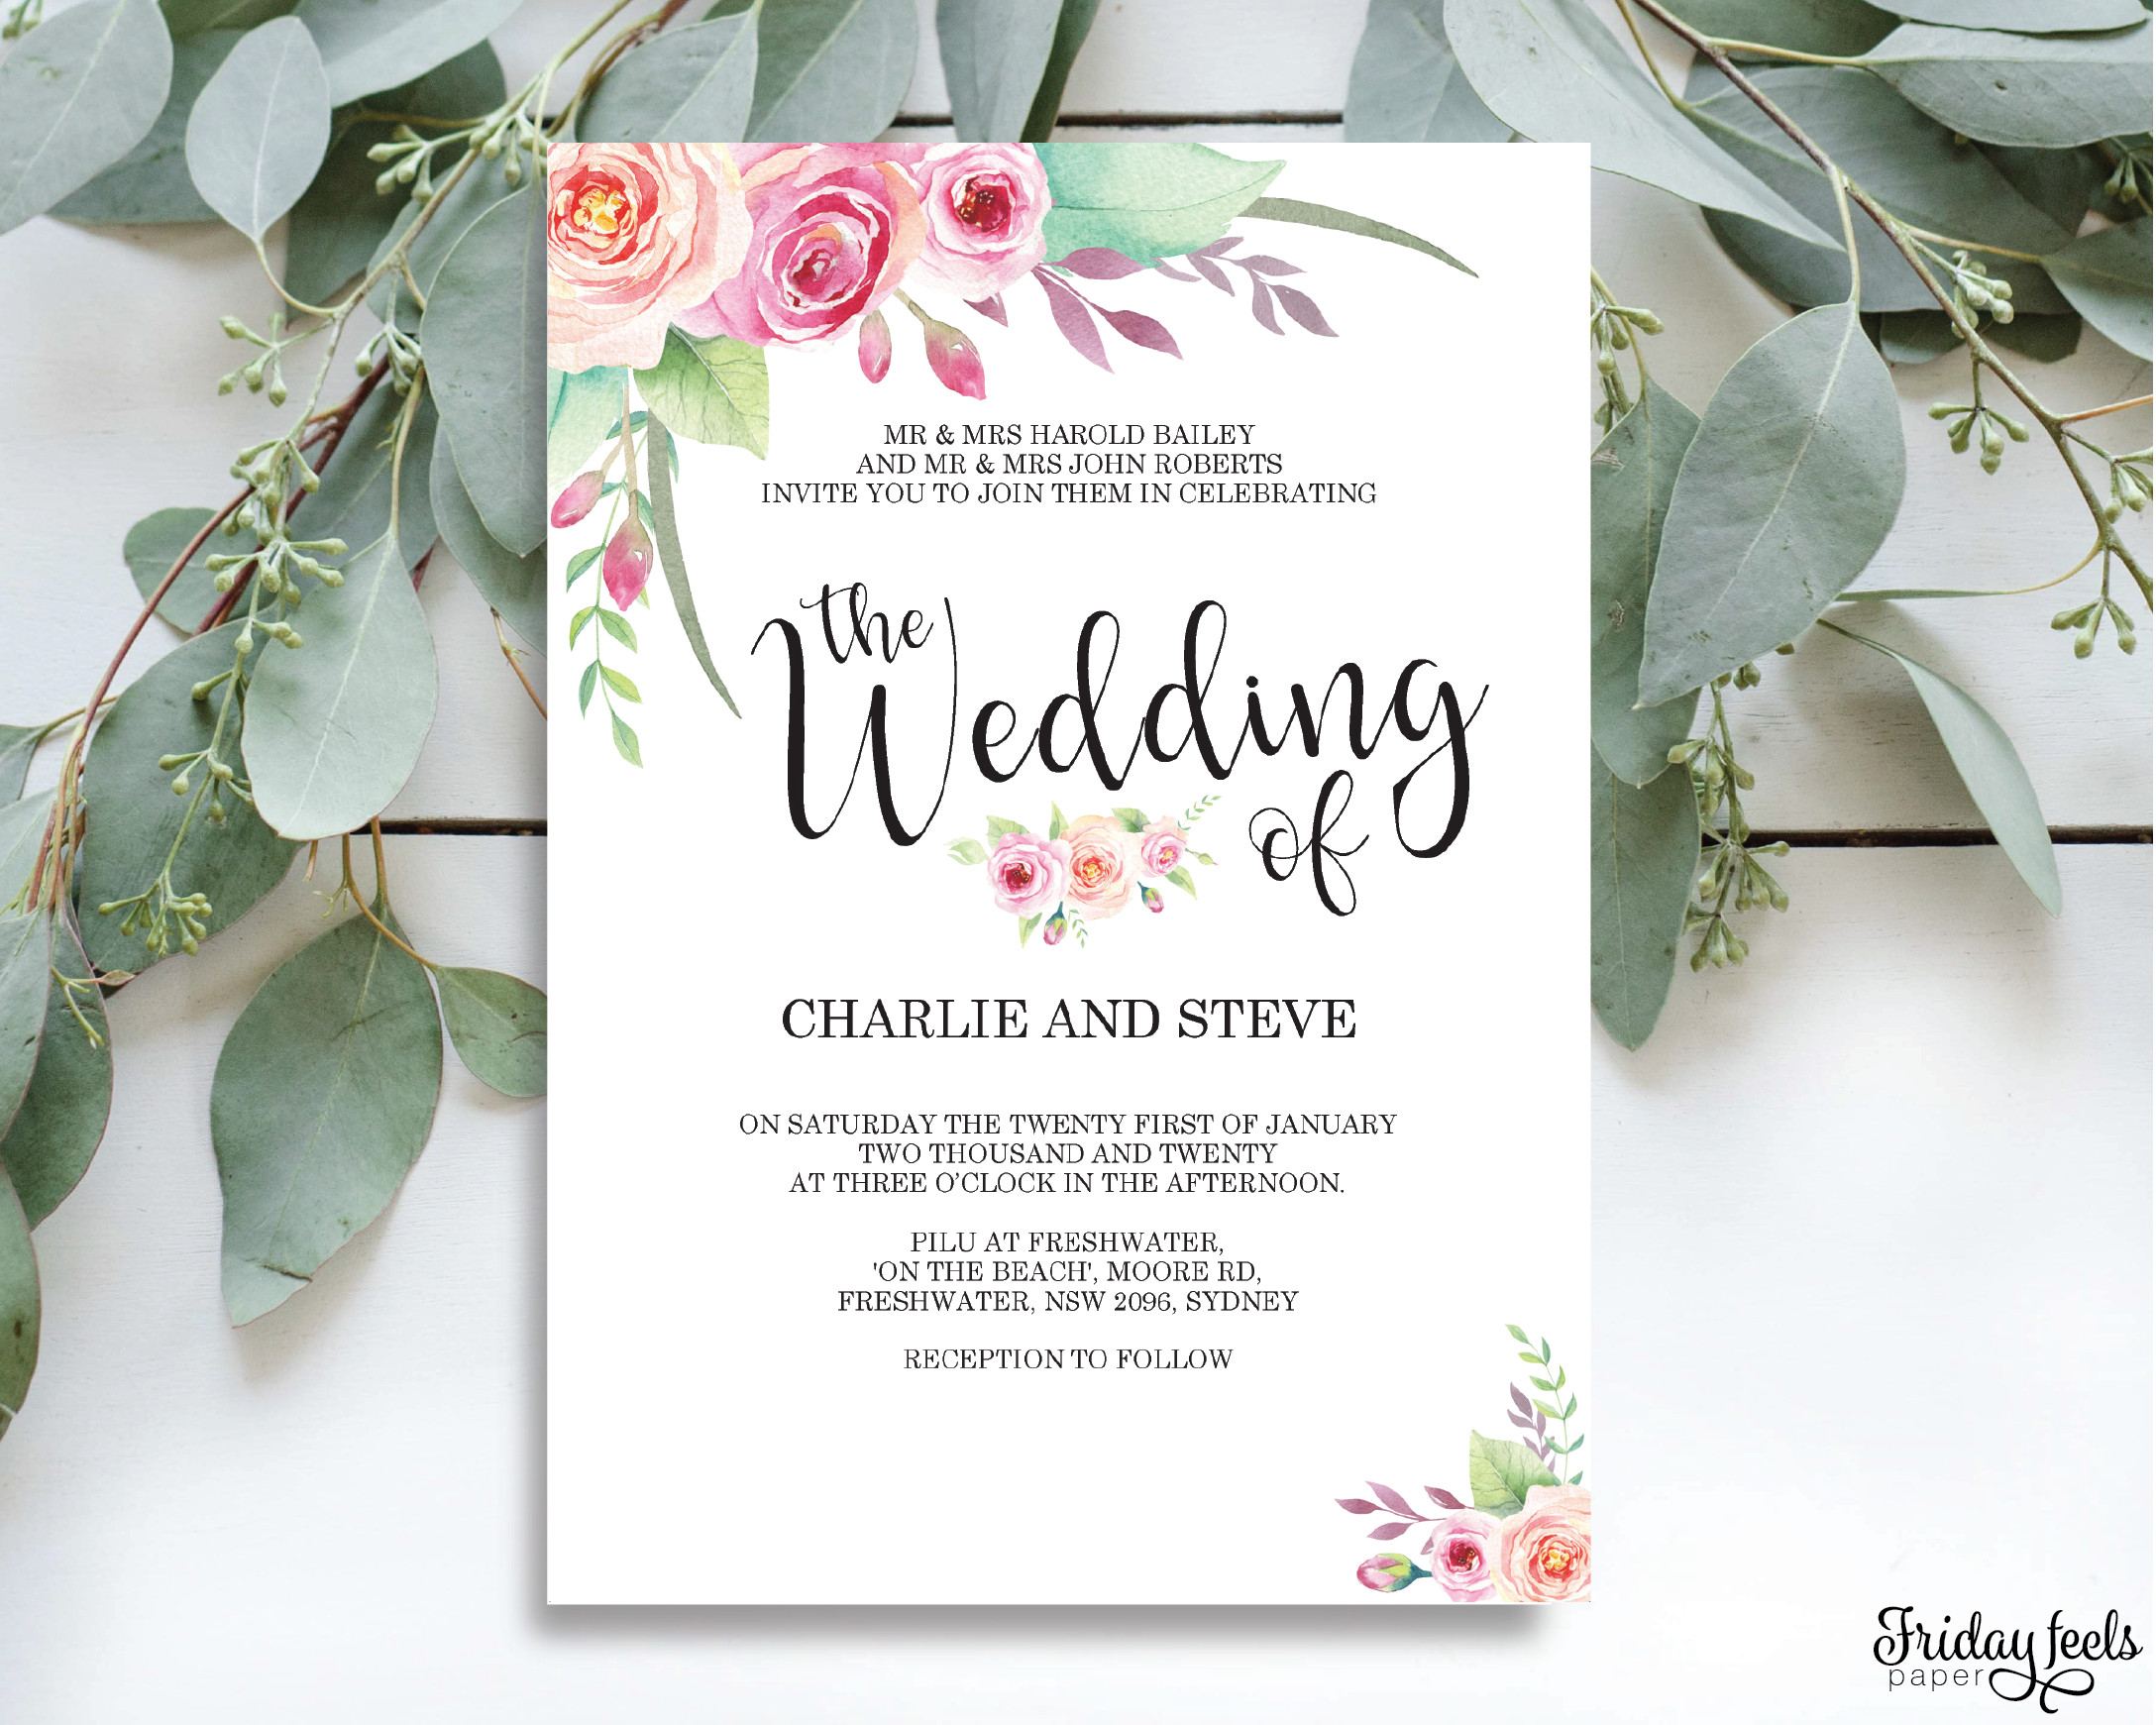 Template For Wedding Invitations
 Floral Wedding Invitation Editable PDF Template Friday